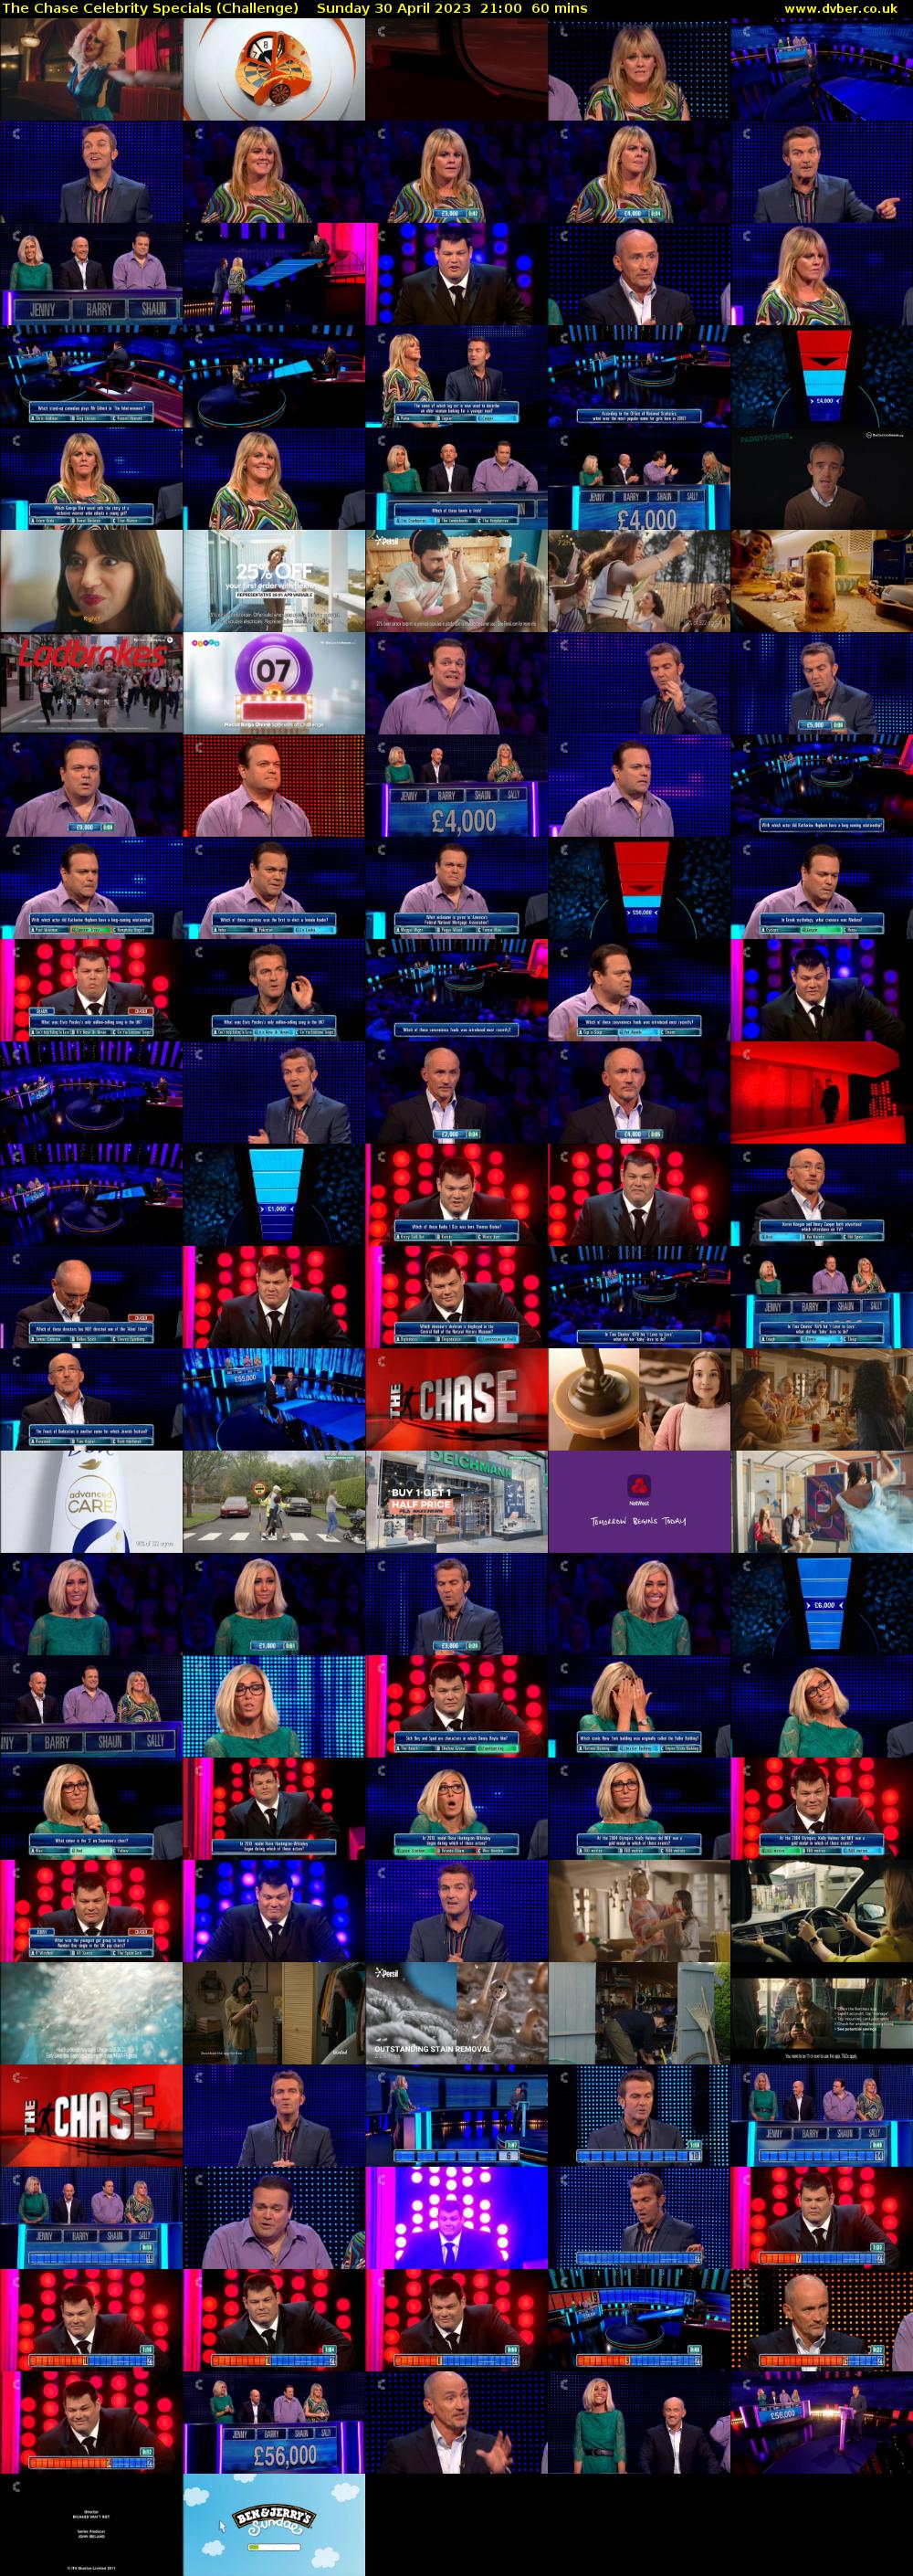 The Chase Celebrity Specials (Challenge) Sunday 30 April 2023 21:00 - 22:00